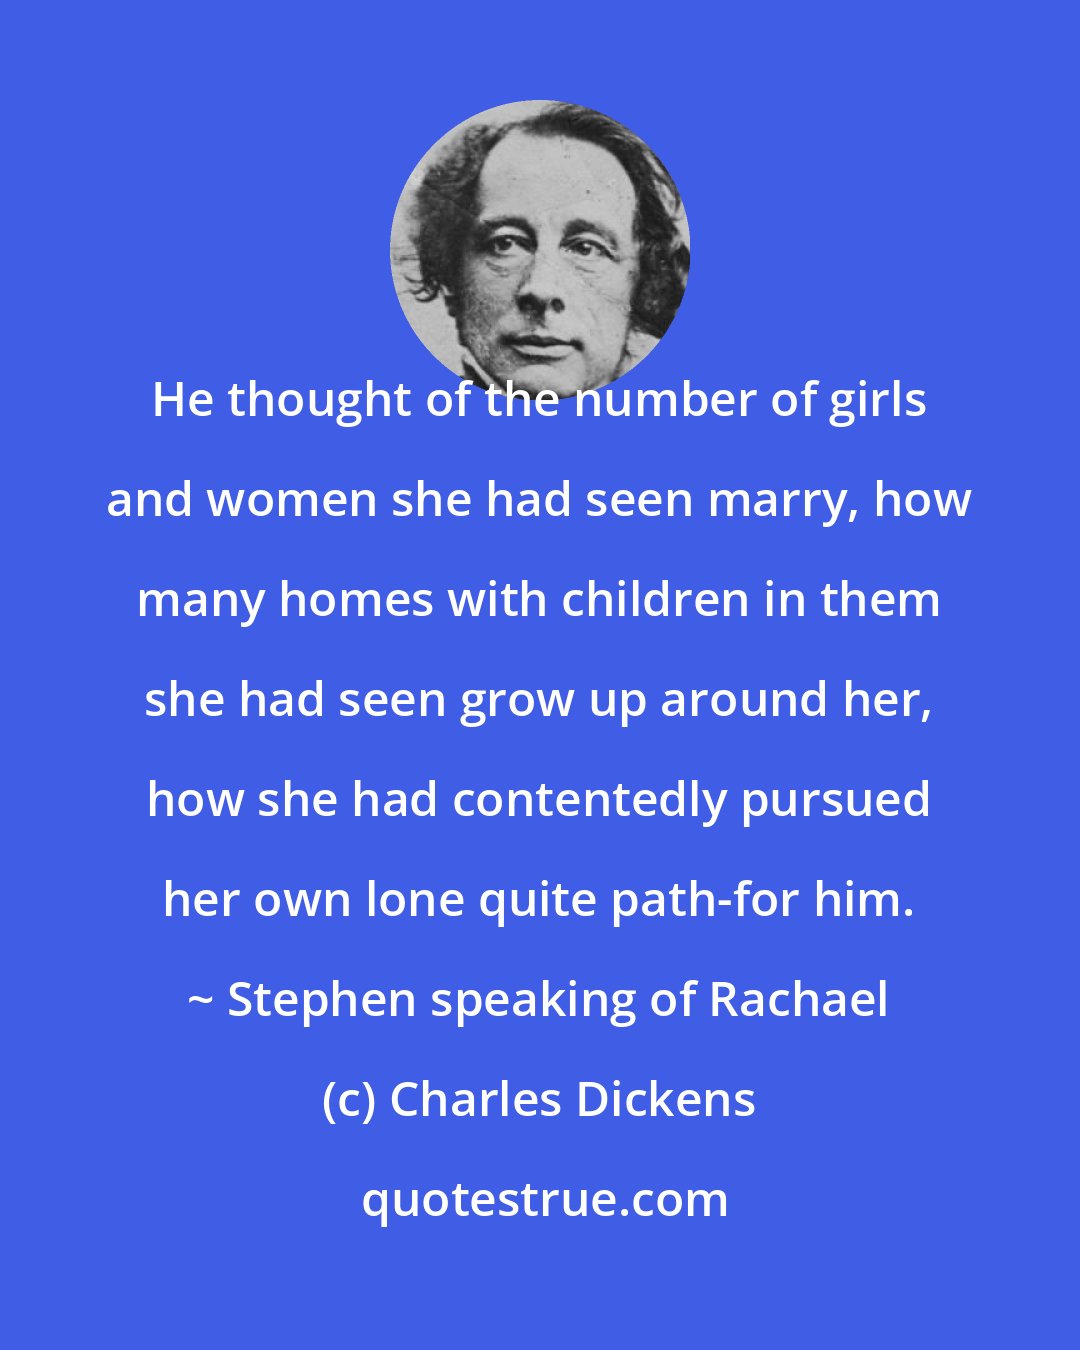 Charles Dickens: He thought of the number of girls and women she had seen marry, how many homes with children in them she had seen grow up around her, how she had contentedly pursued her own lone quite path-for him. ~ Stephen speaking of Rachael